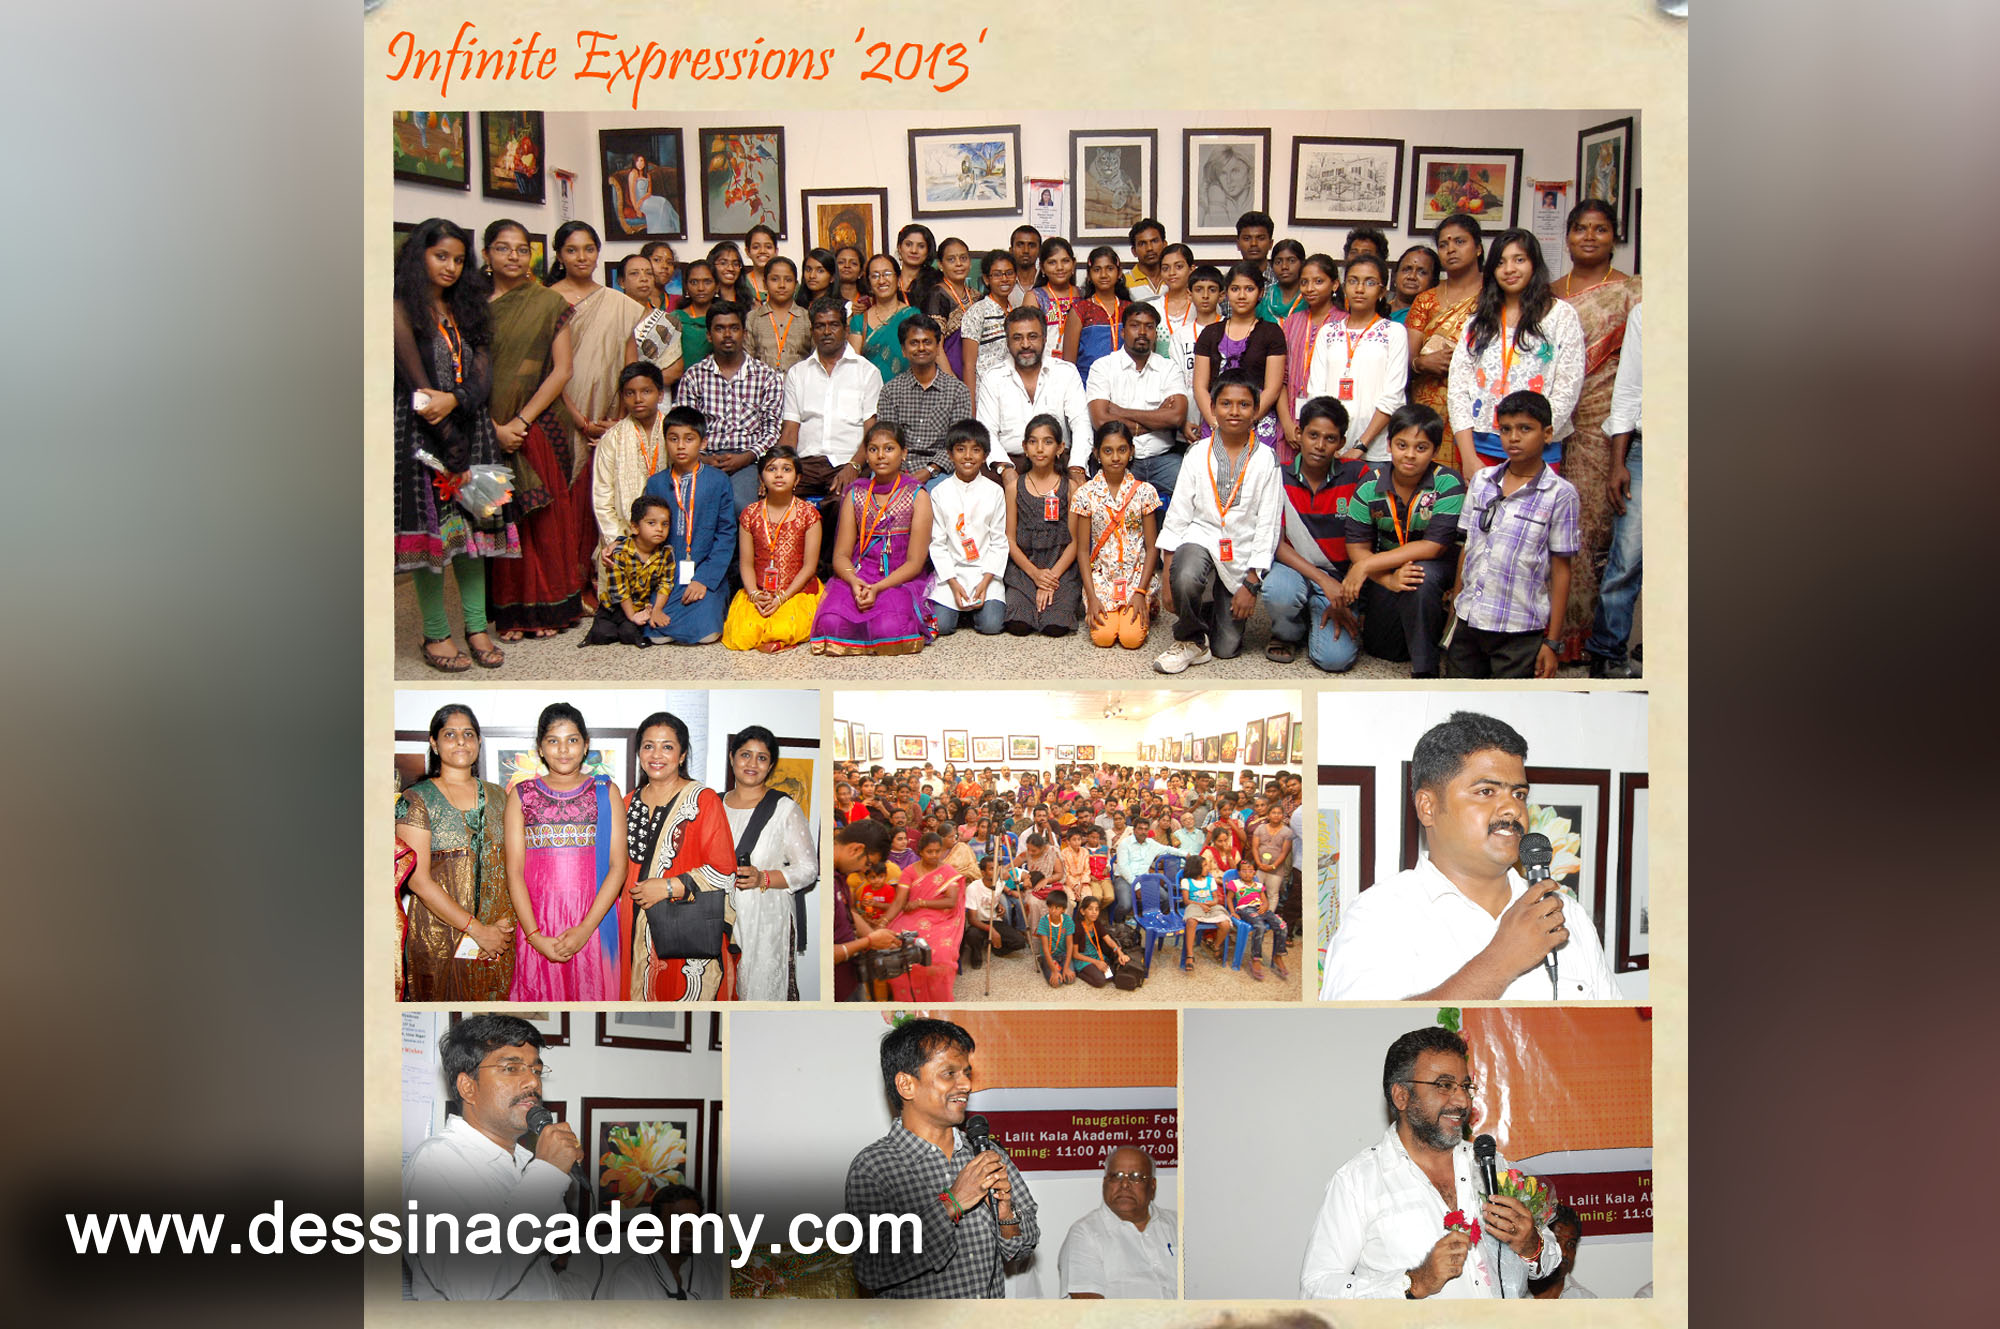 Dessin School of arts Event Gallery 3, Painting Coaching in AdhanurDessin Academy